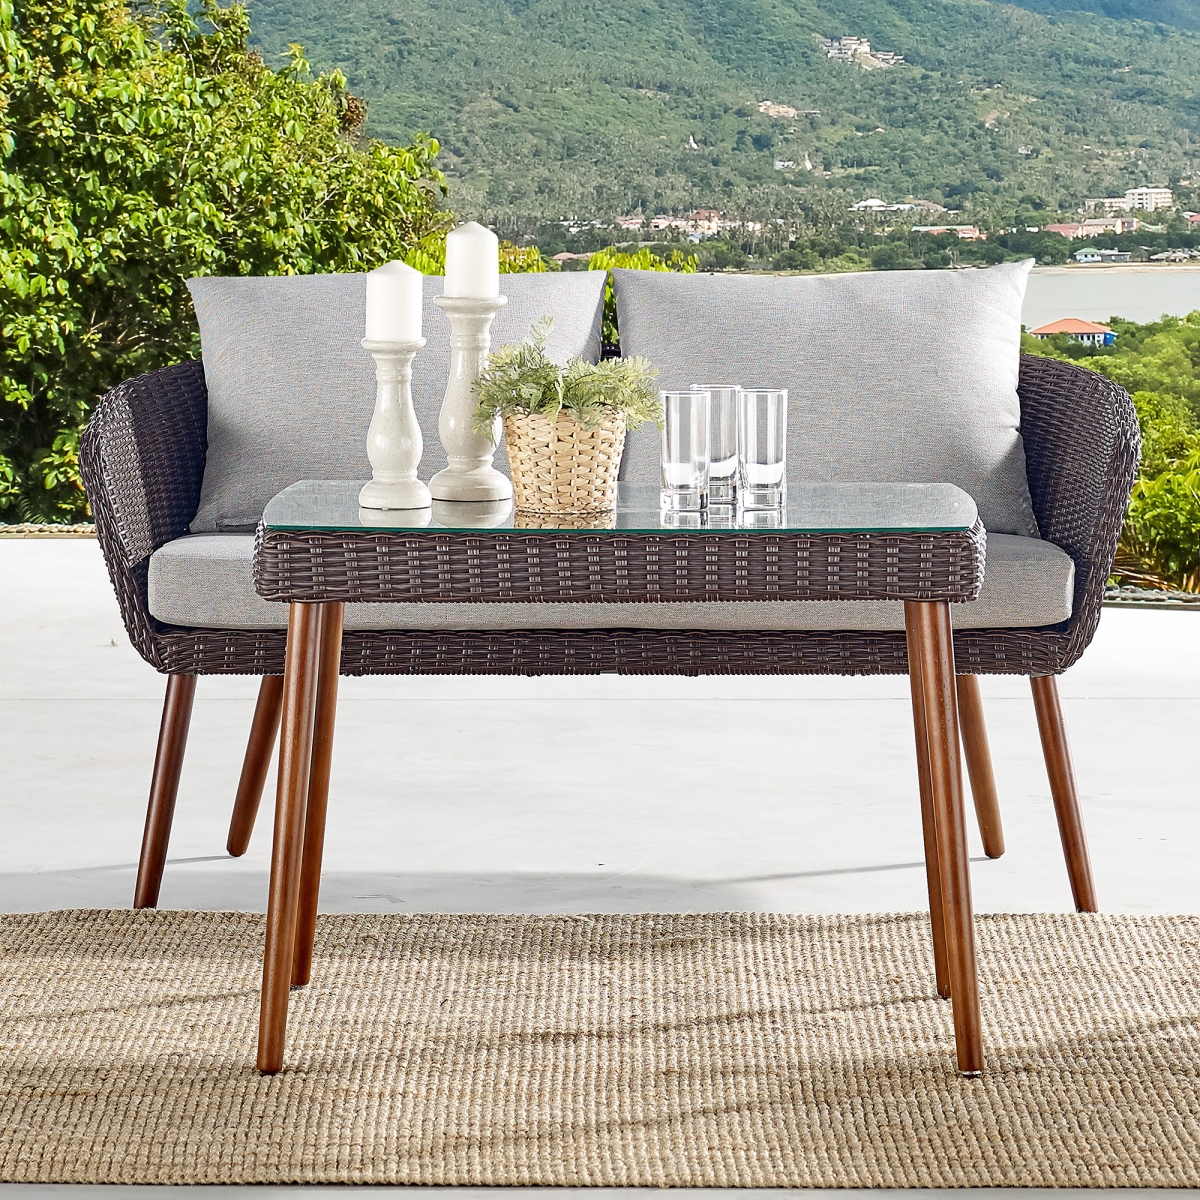 Picture of Alaterre AWWB04BB 26 in. Athens All-Weather Wicker Outdoor Cocktail Table with Glass Top